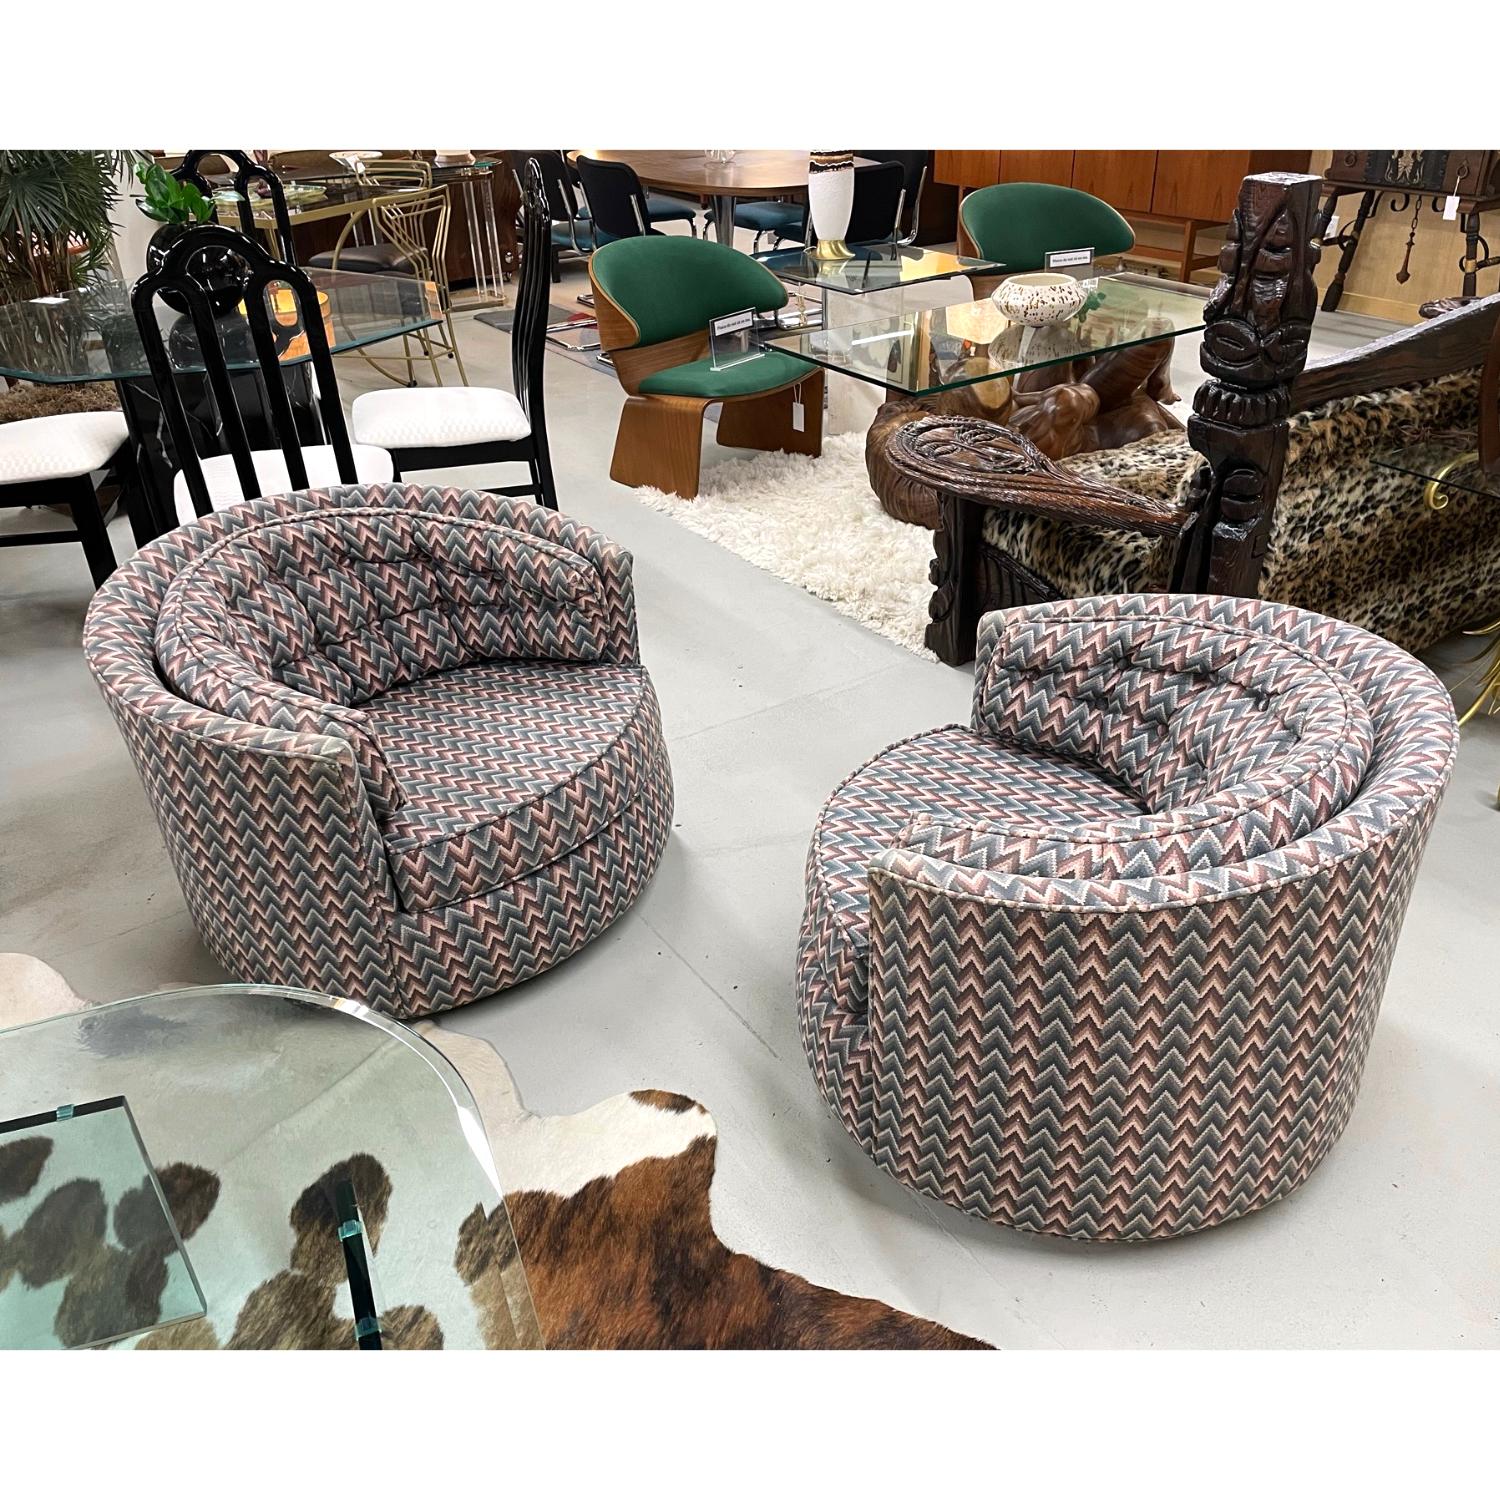 Elegant pair of Milo Baughman style vintage tub chairs with swivel base. These chairs were updated some time in the early 90s with it’s current chevron fabric. The pattern is a chevron ombre with graduating tones of mauve, gray, and blue. Arguably